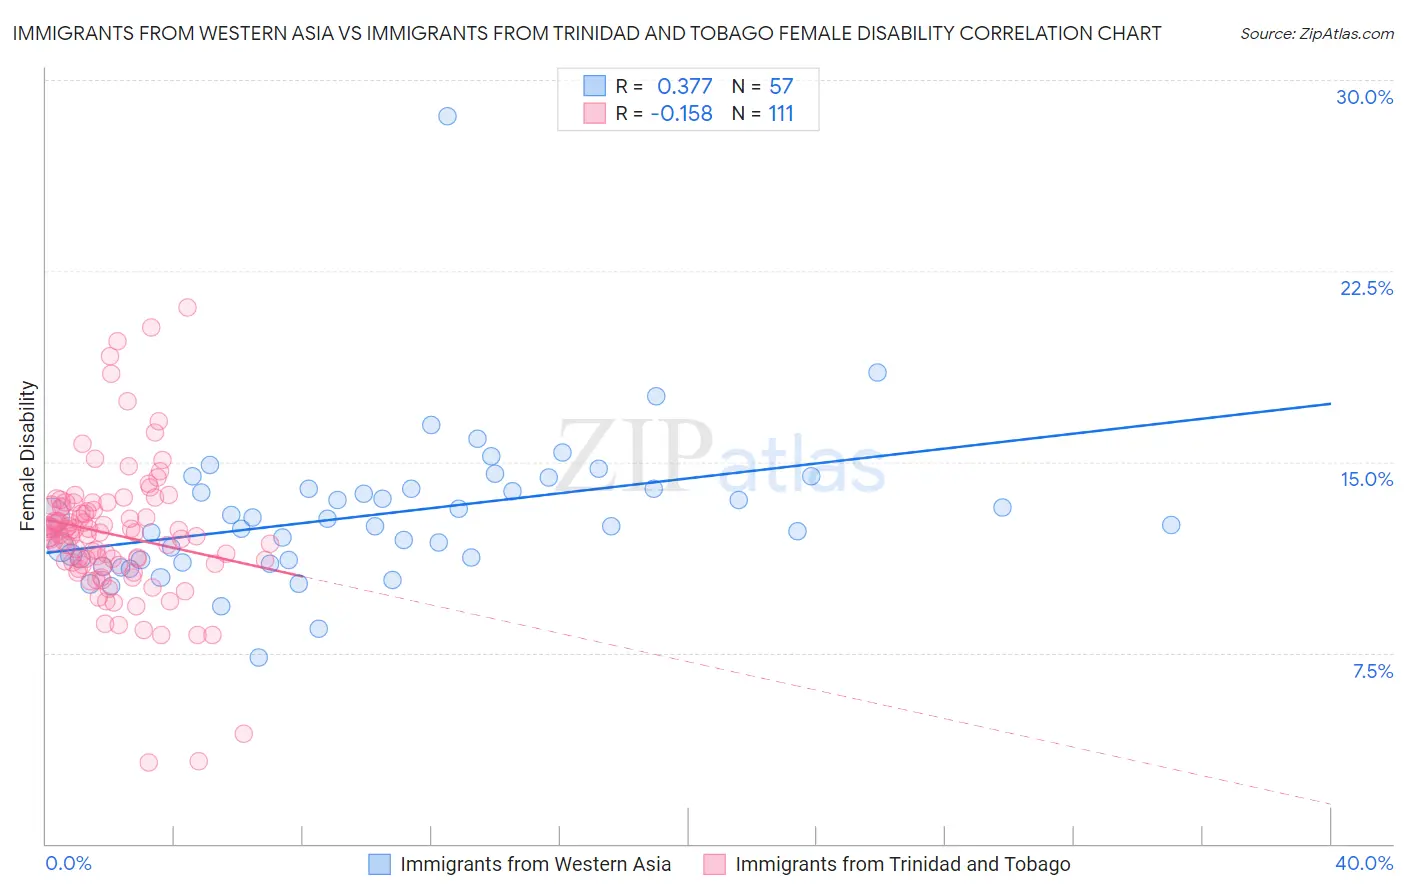 Immigrants from Western Asia vs Immigrants from Trinidad and Tobago Female Disability